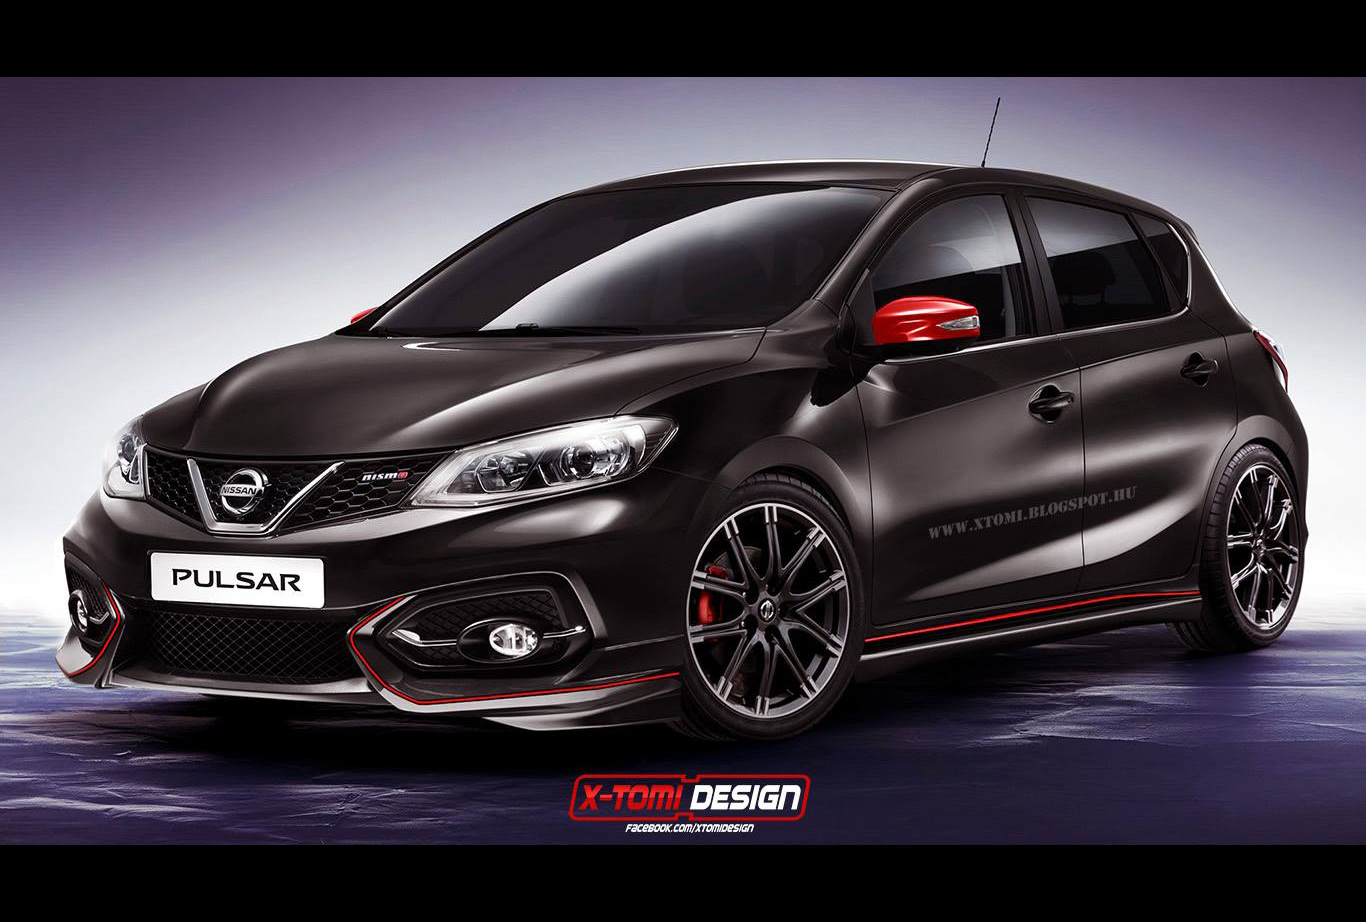 Nissan Pulsar Nismo could be a great idea?